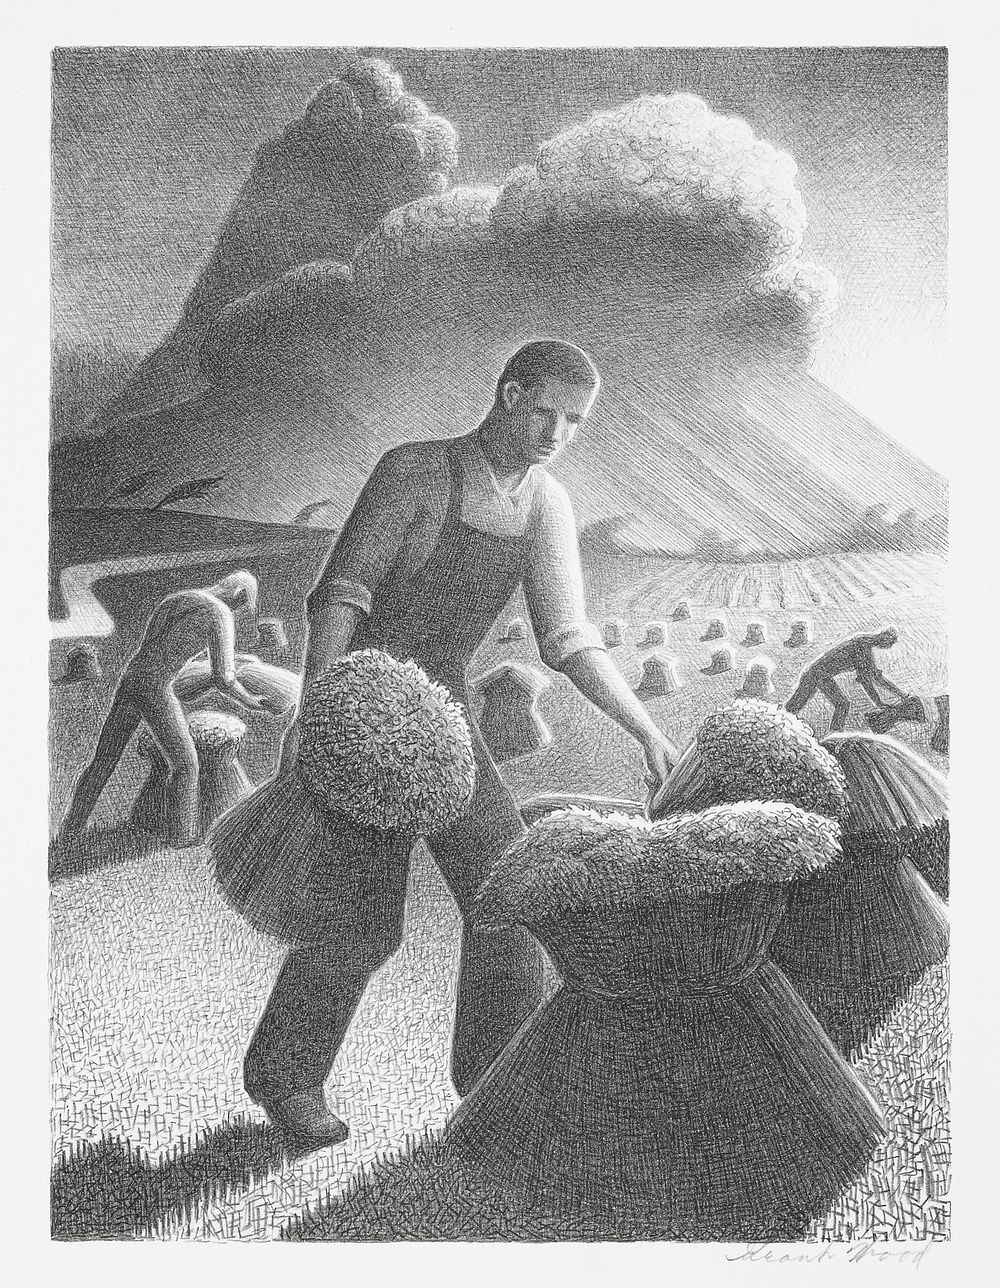 Grant Wood's Approaching Storm (1940) famous print. Original from the Saint Louis Art Museum. Digitally enhanced by rawpixel.